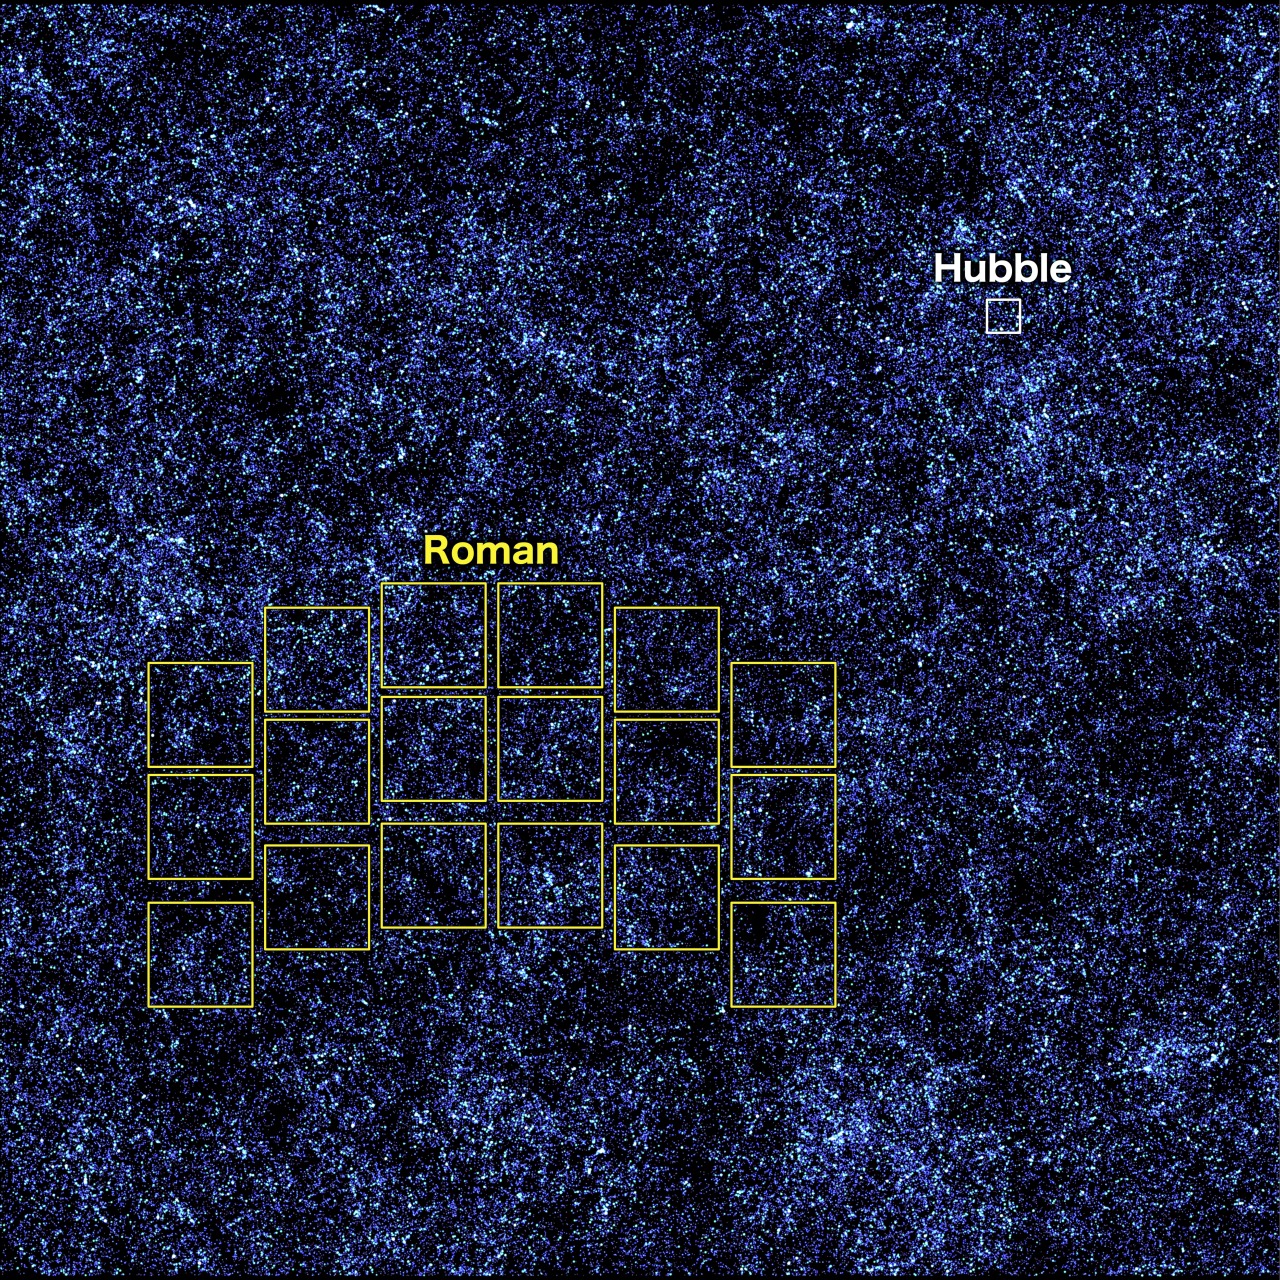 Thousands of small, light and deep blue dots cover a black background representing galaxies in a simulated universe. A tiny white square is labeled "Hubble." A set of 18 much larger squares, oriented in three curved rows, are labeled "Roman." Credit: NASA's Goddard Space Flight Center and A. Yung